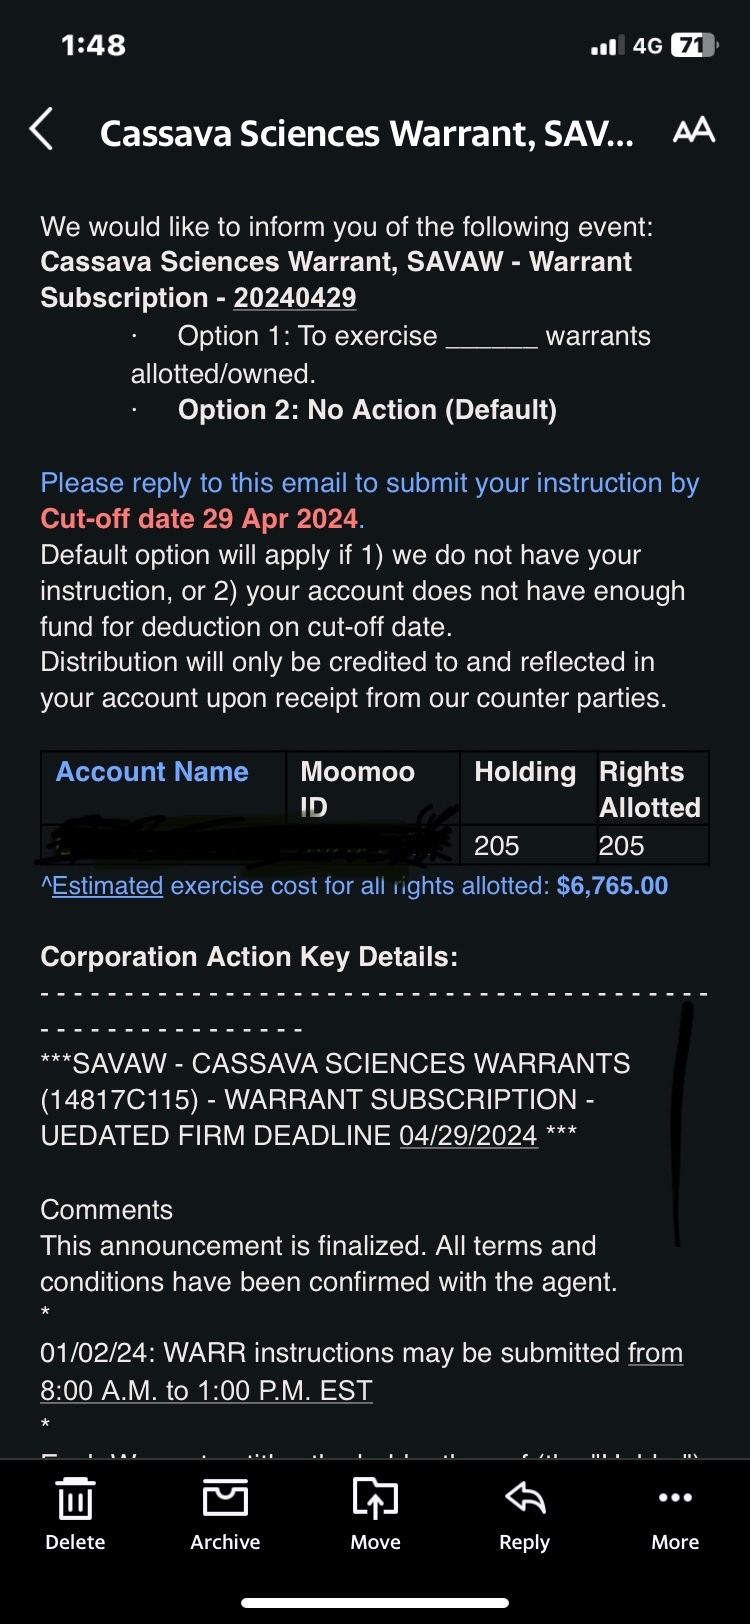 $Cassava Sciences Warrants (SAVAW.US)$ What should I do when I receive this email? Thank you Bang for being so busy!